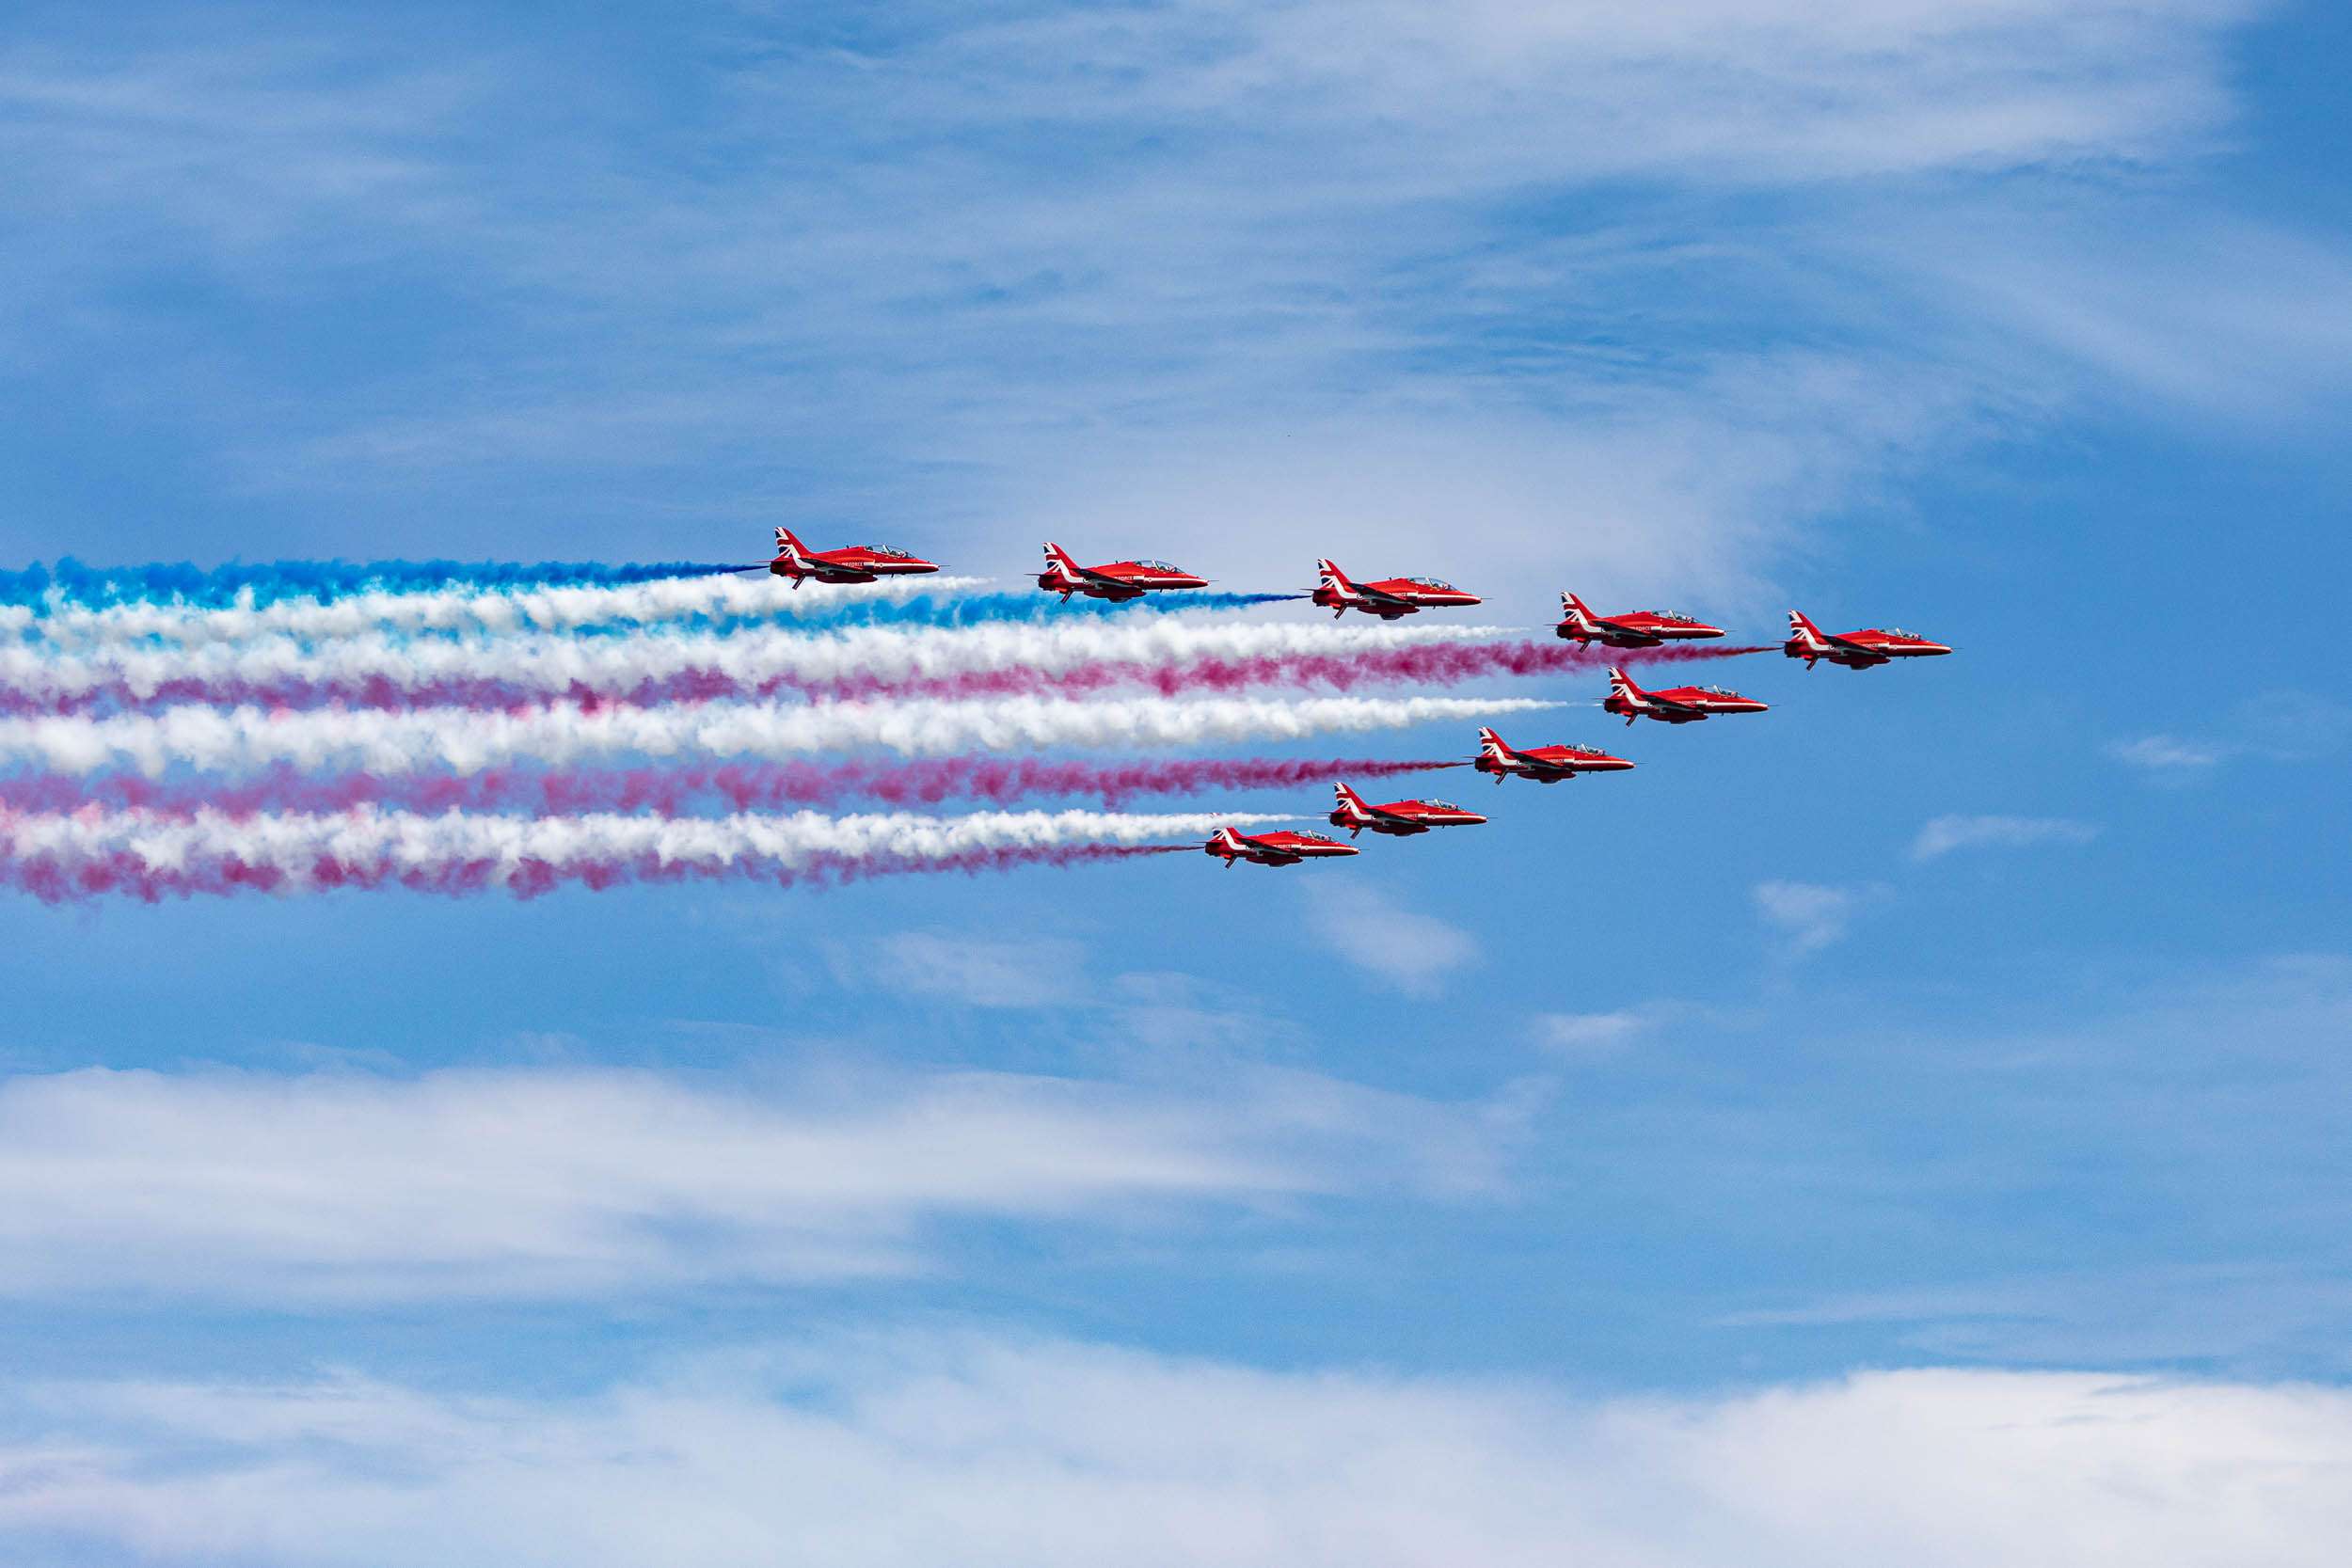 The Royal Air Force Red Arrows performing with colorful smoke